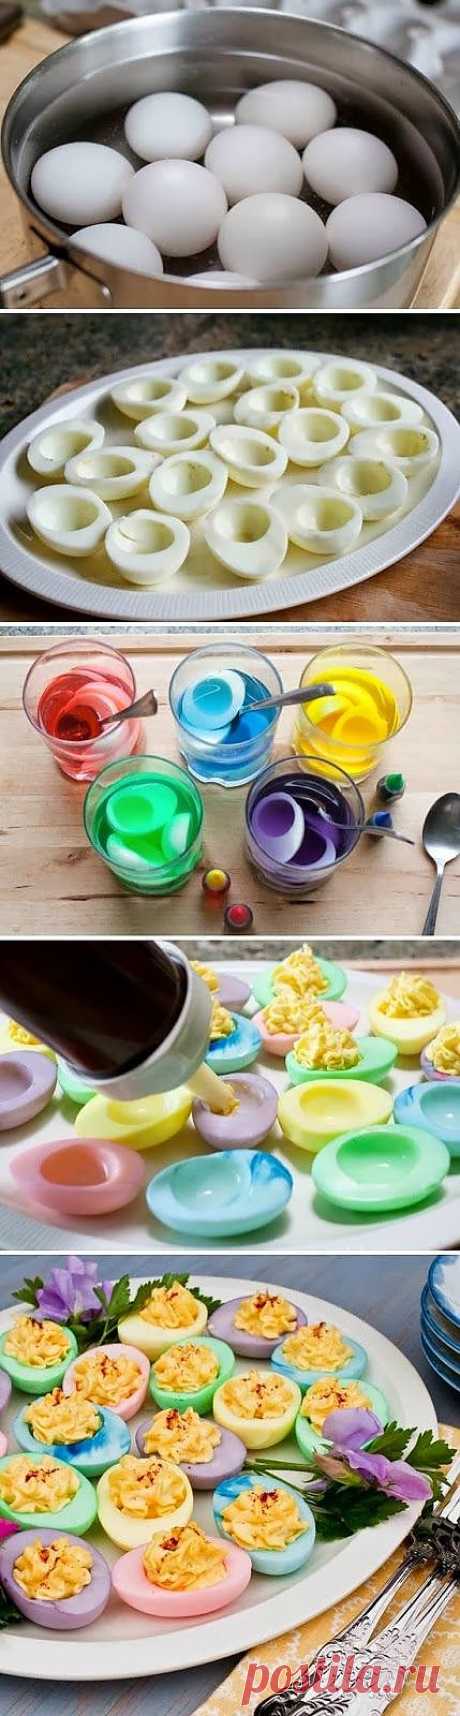 My DIY Projects: How To Make Colorful Easter ... | ~Creativity Awaits~